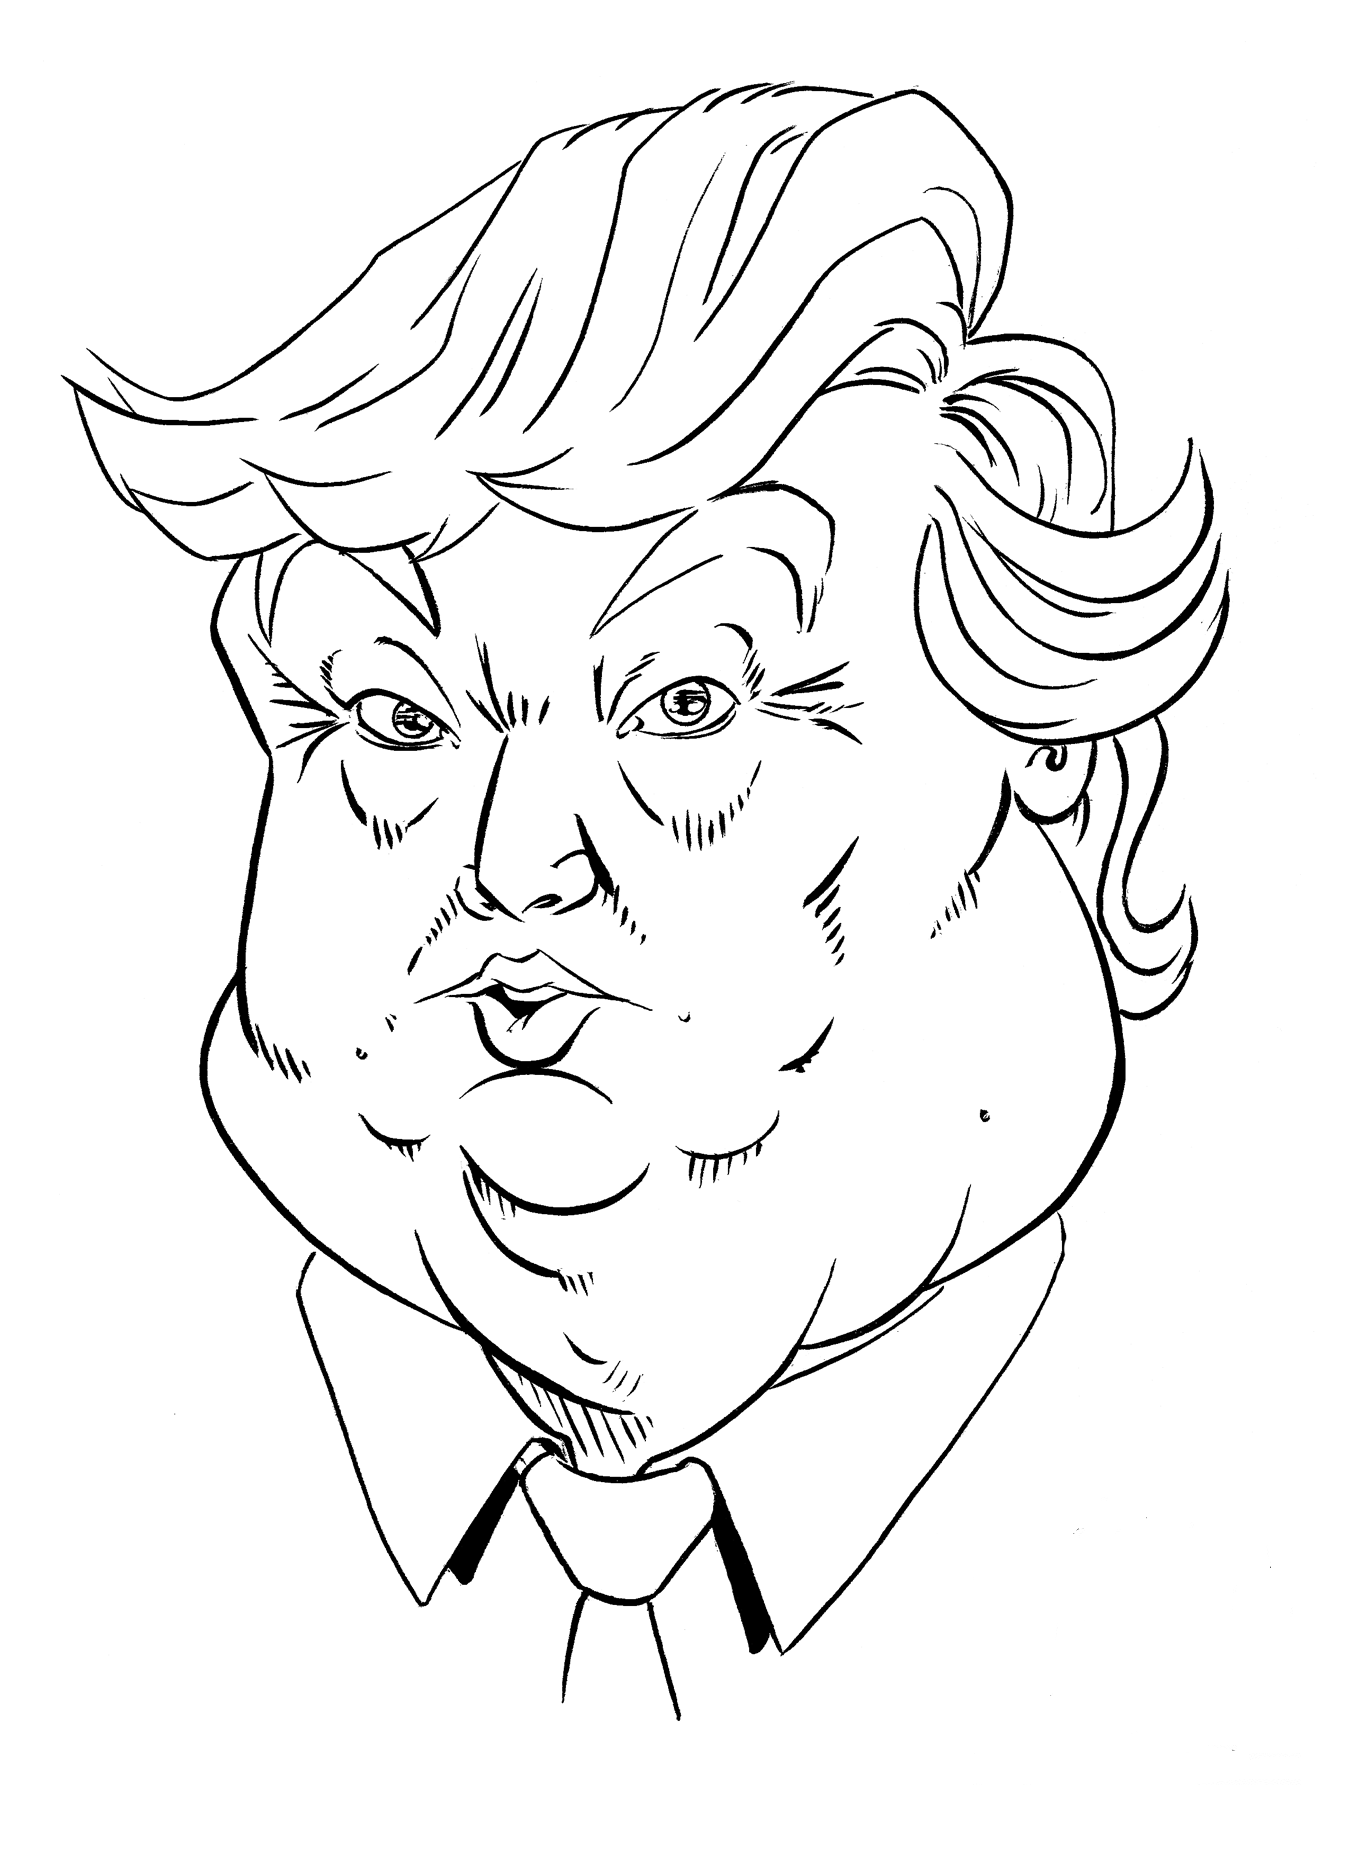 Donald Trump's Fat Face Coloring Page - Free Printable Coloring Pages